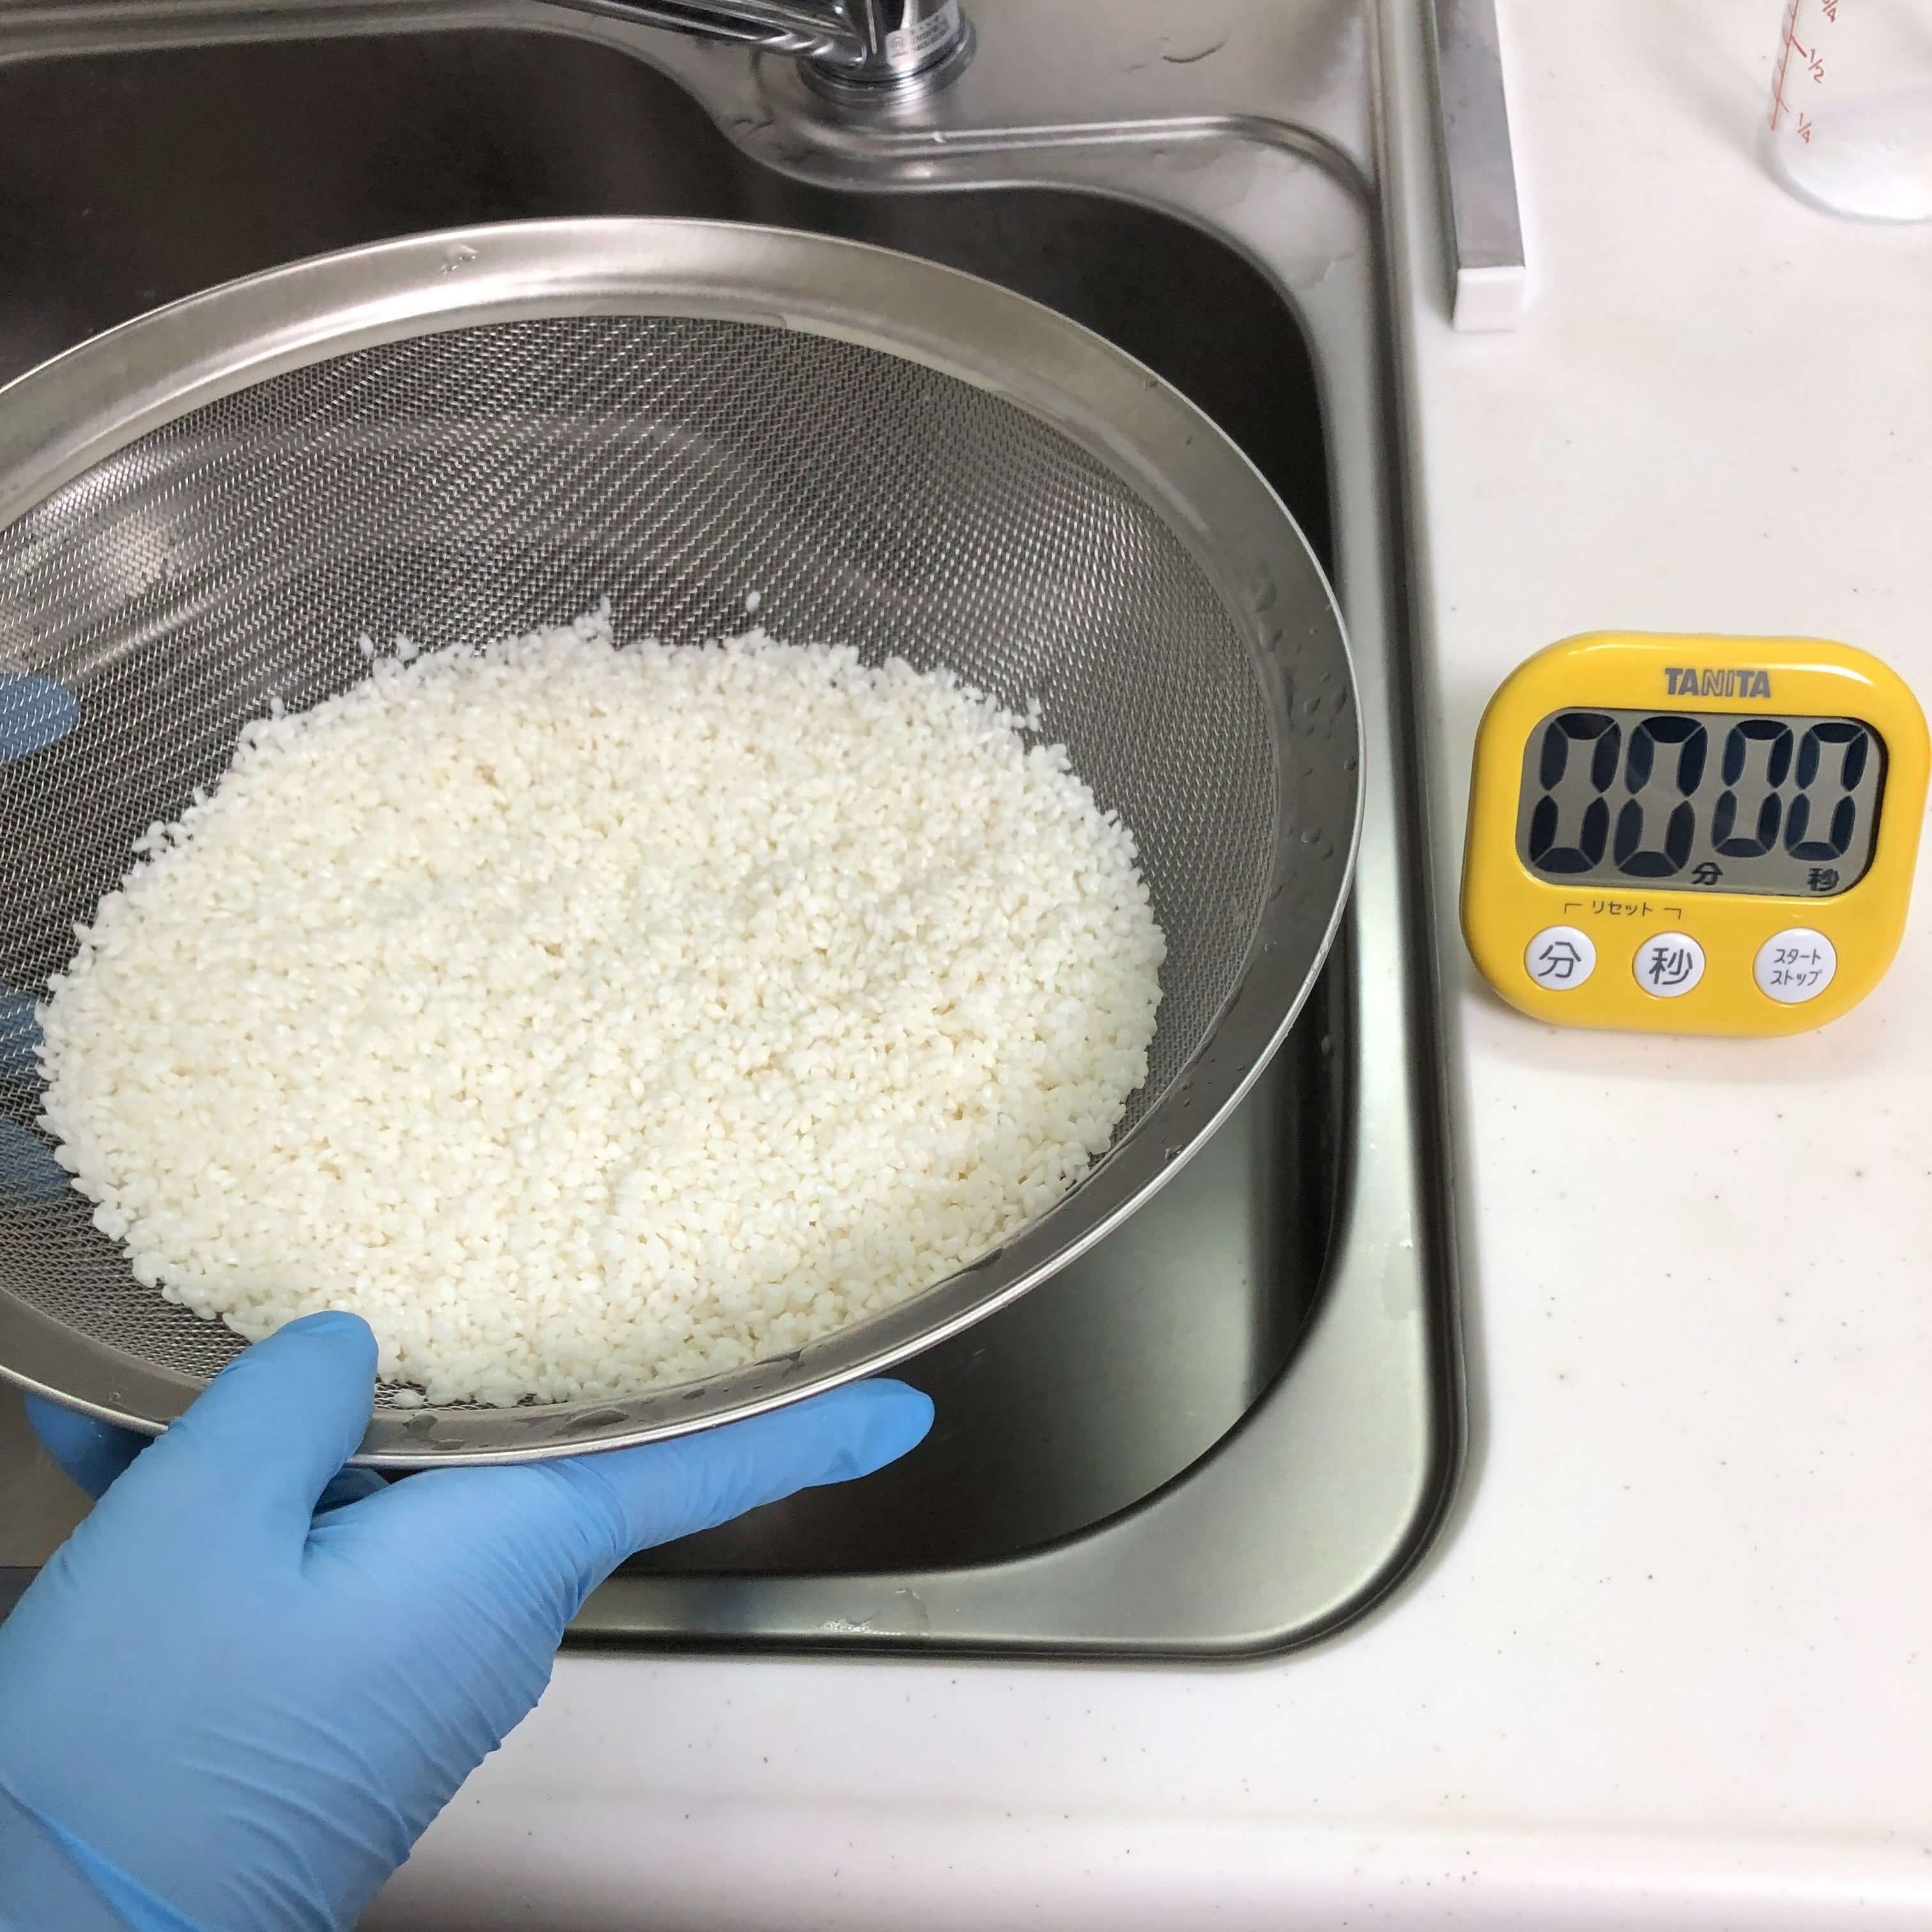 Step 5: How to make Japanese rice in 8 steps